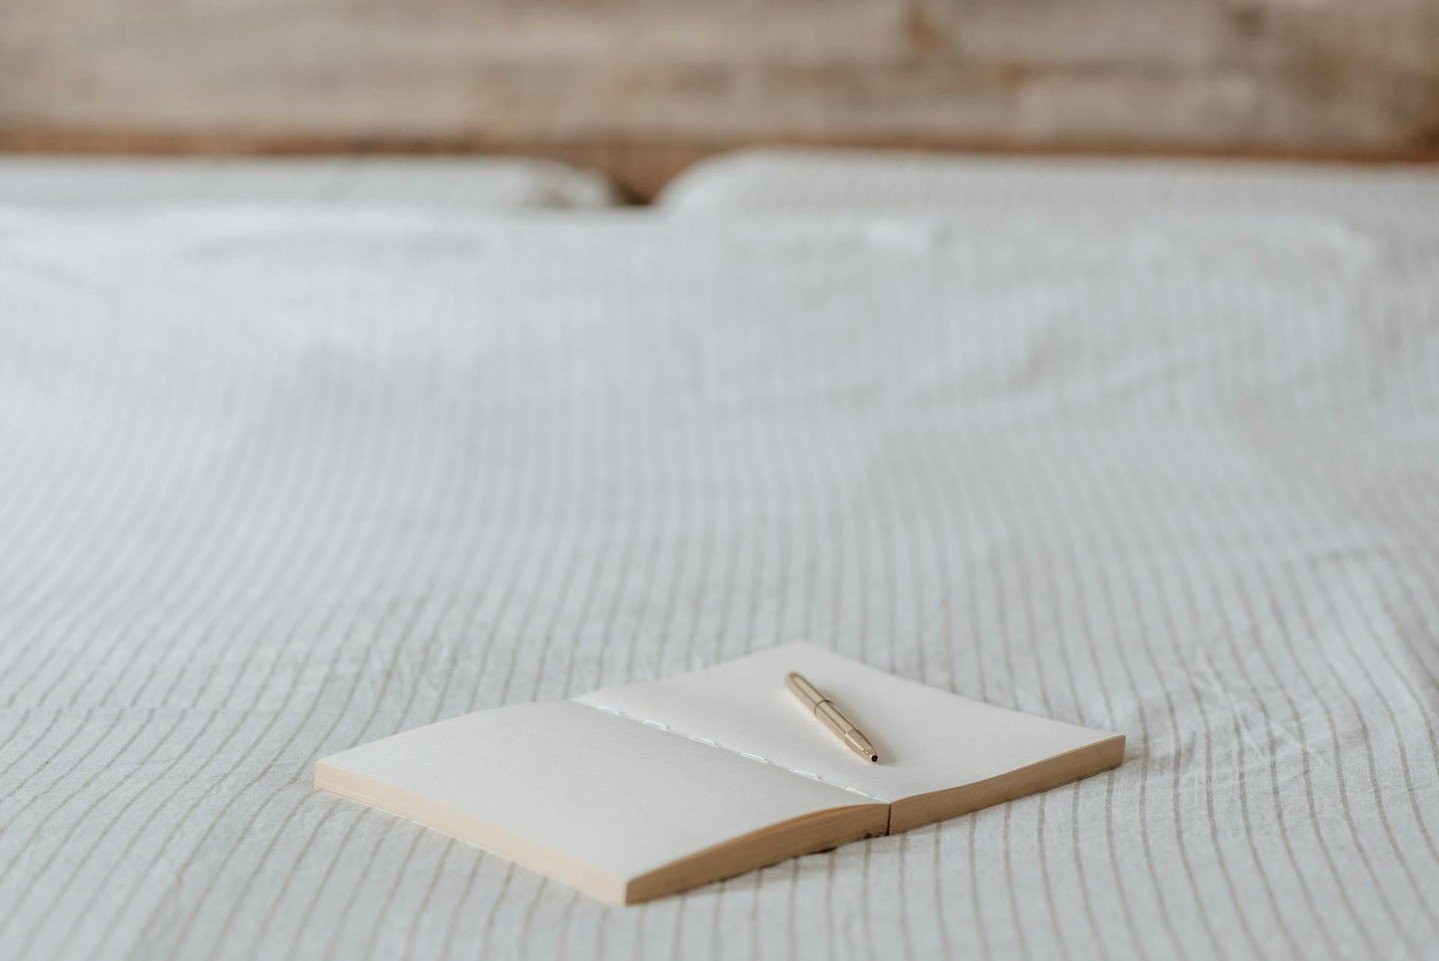 &ndash; On Journaling &ndash;

Feeling overwhelmed by life&rsquo;s ups and downs? Journaling could be your remedy. A simple yet effective practice - free and accessible to all.

Try setting aside just 5 minutes a day and let your thoughts flow freely